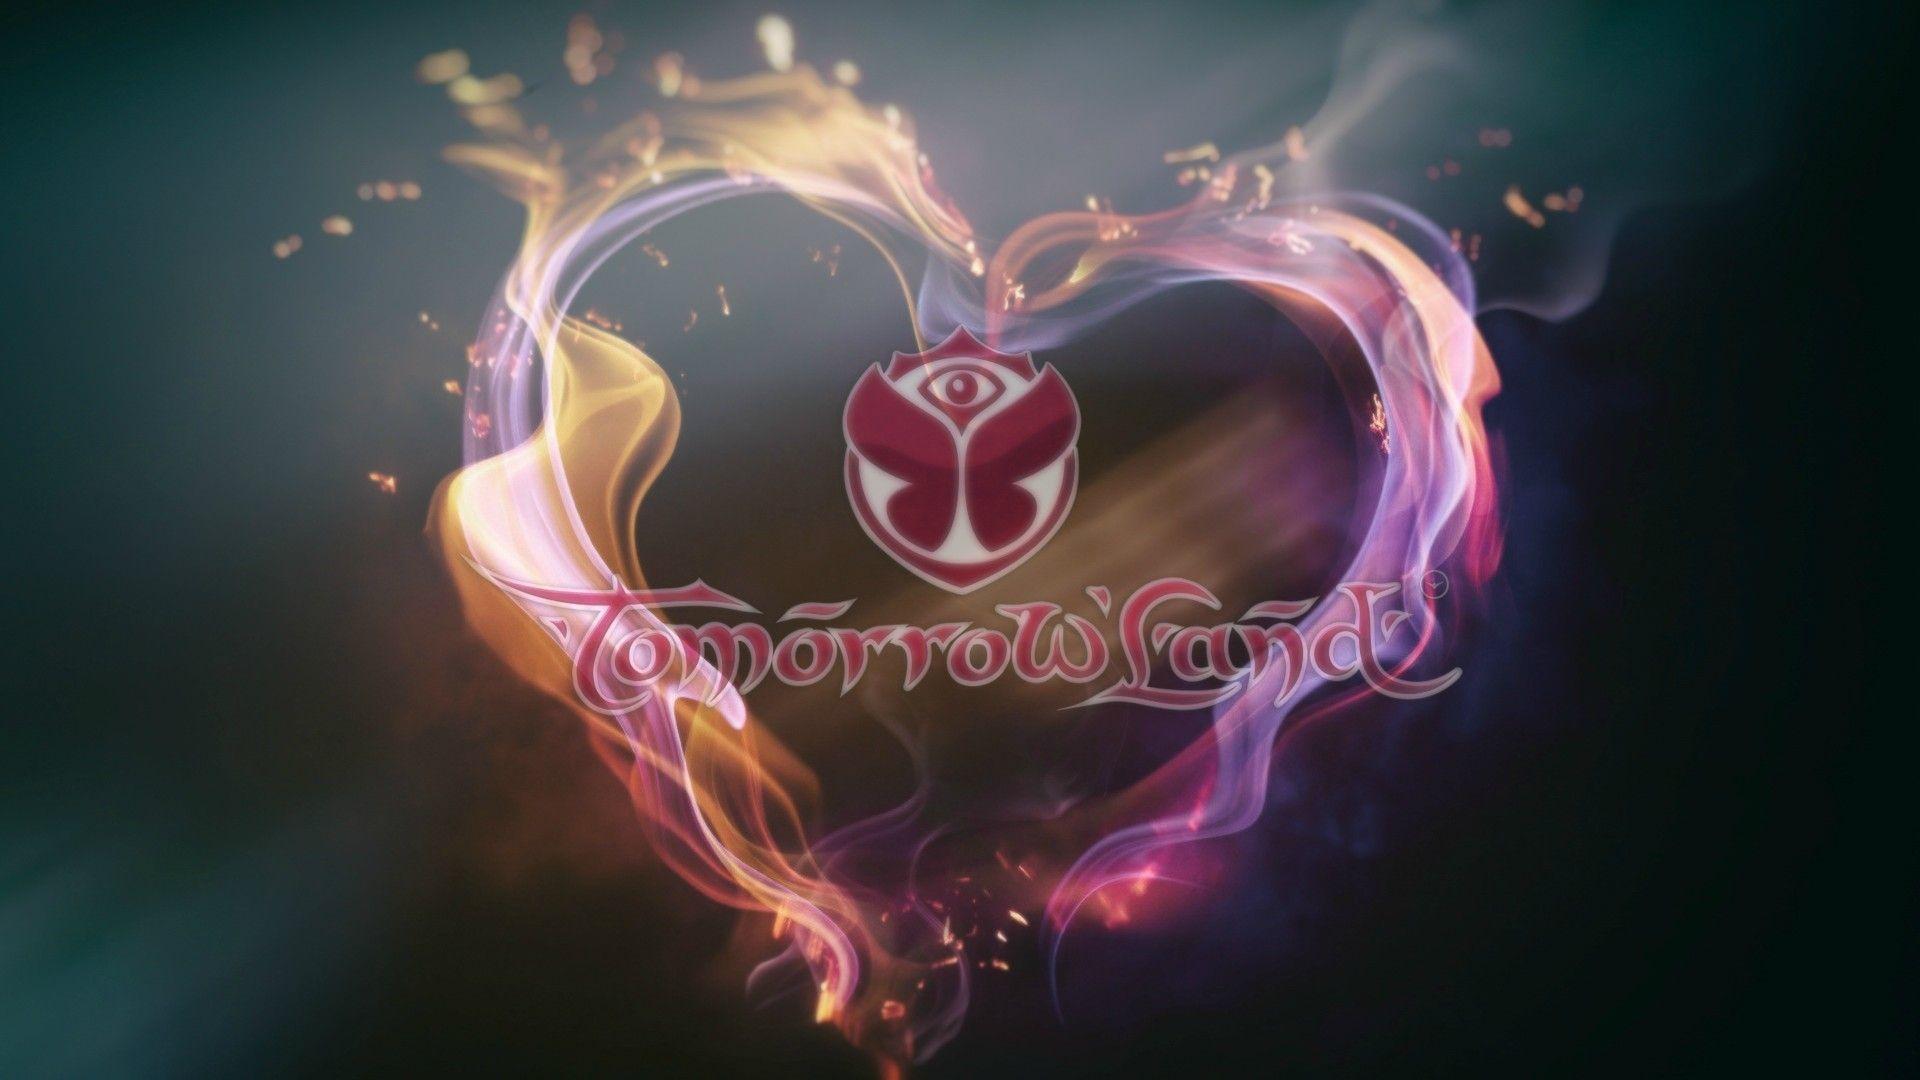 Tomorrowland Logo Wallpaper background picture